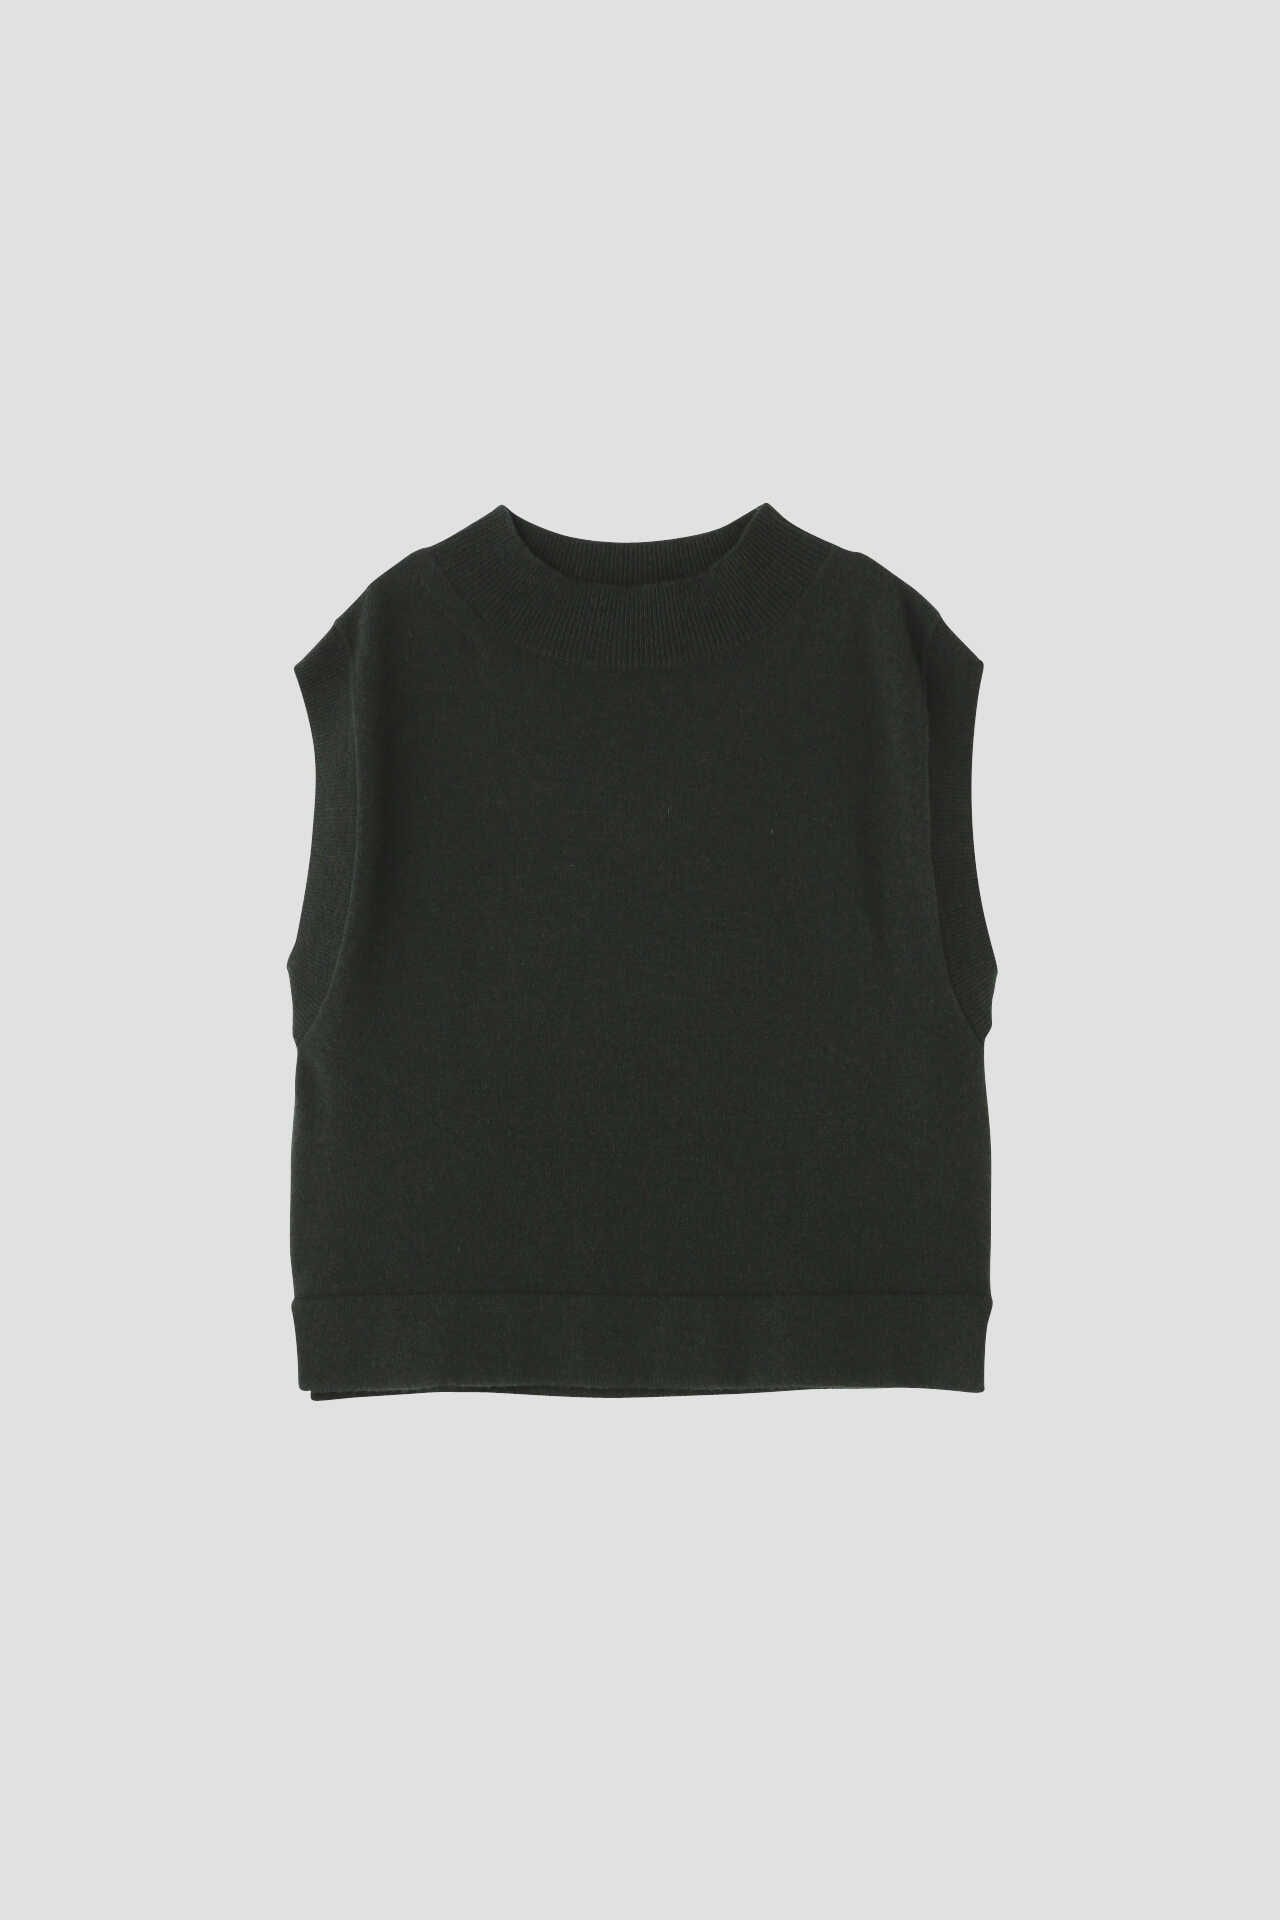 WOOL CASHMERE9